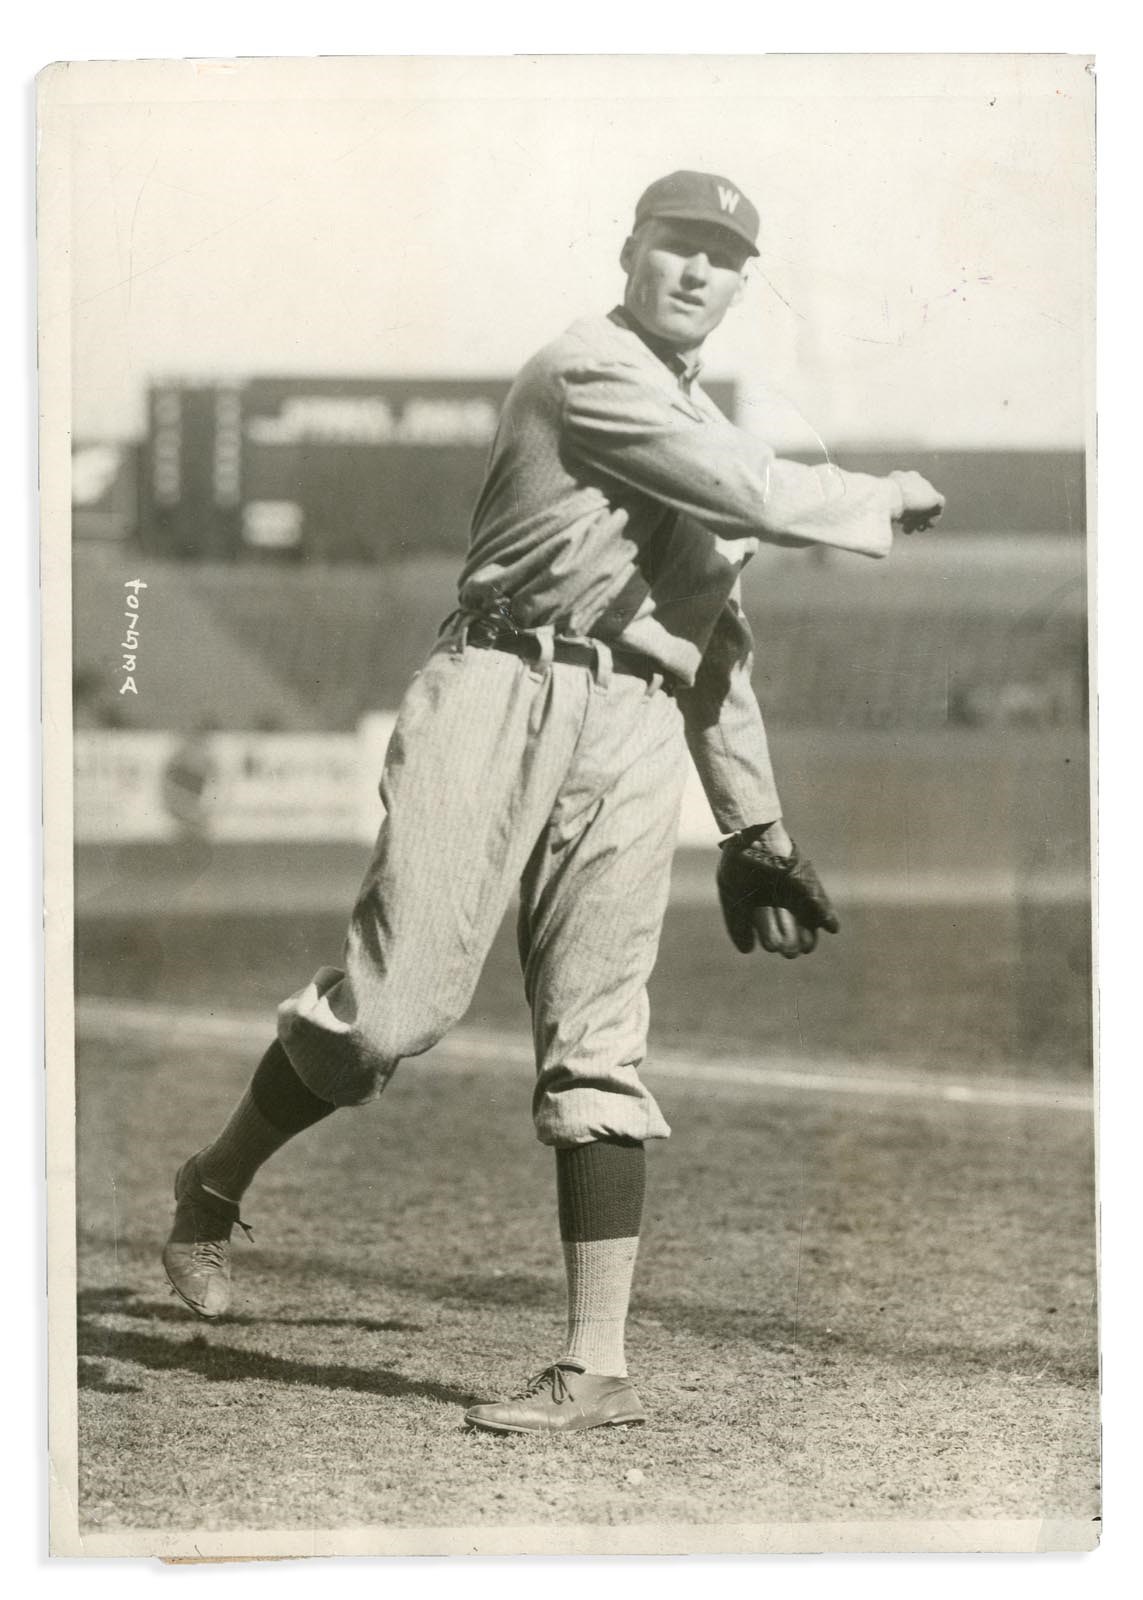 Vintage Sports Photographs - 1920 Walter Johnson Type 1 Photo Referencing His No-Hitter